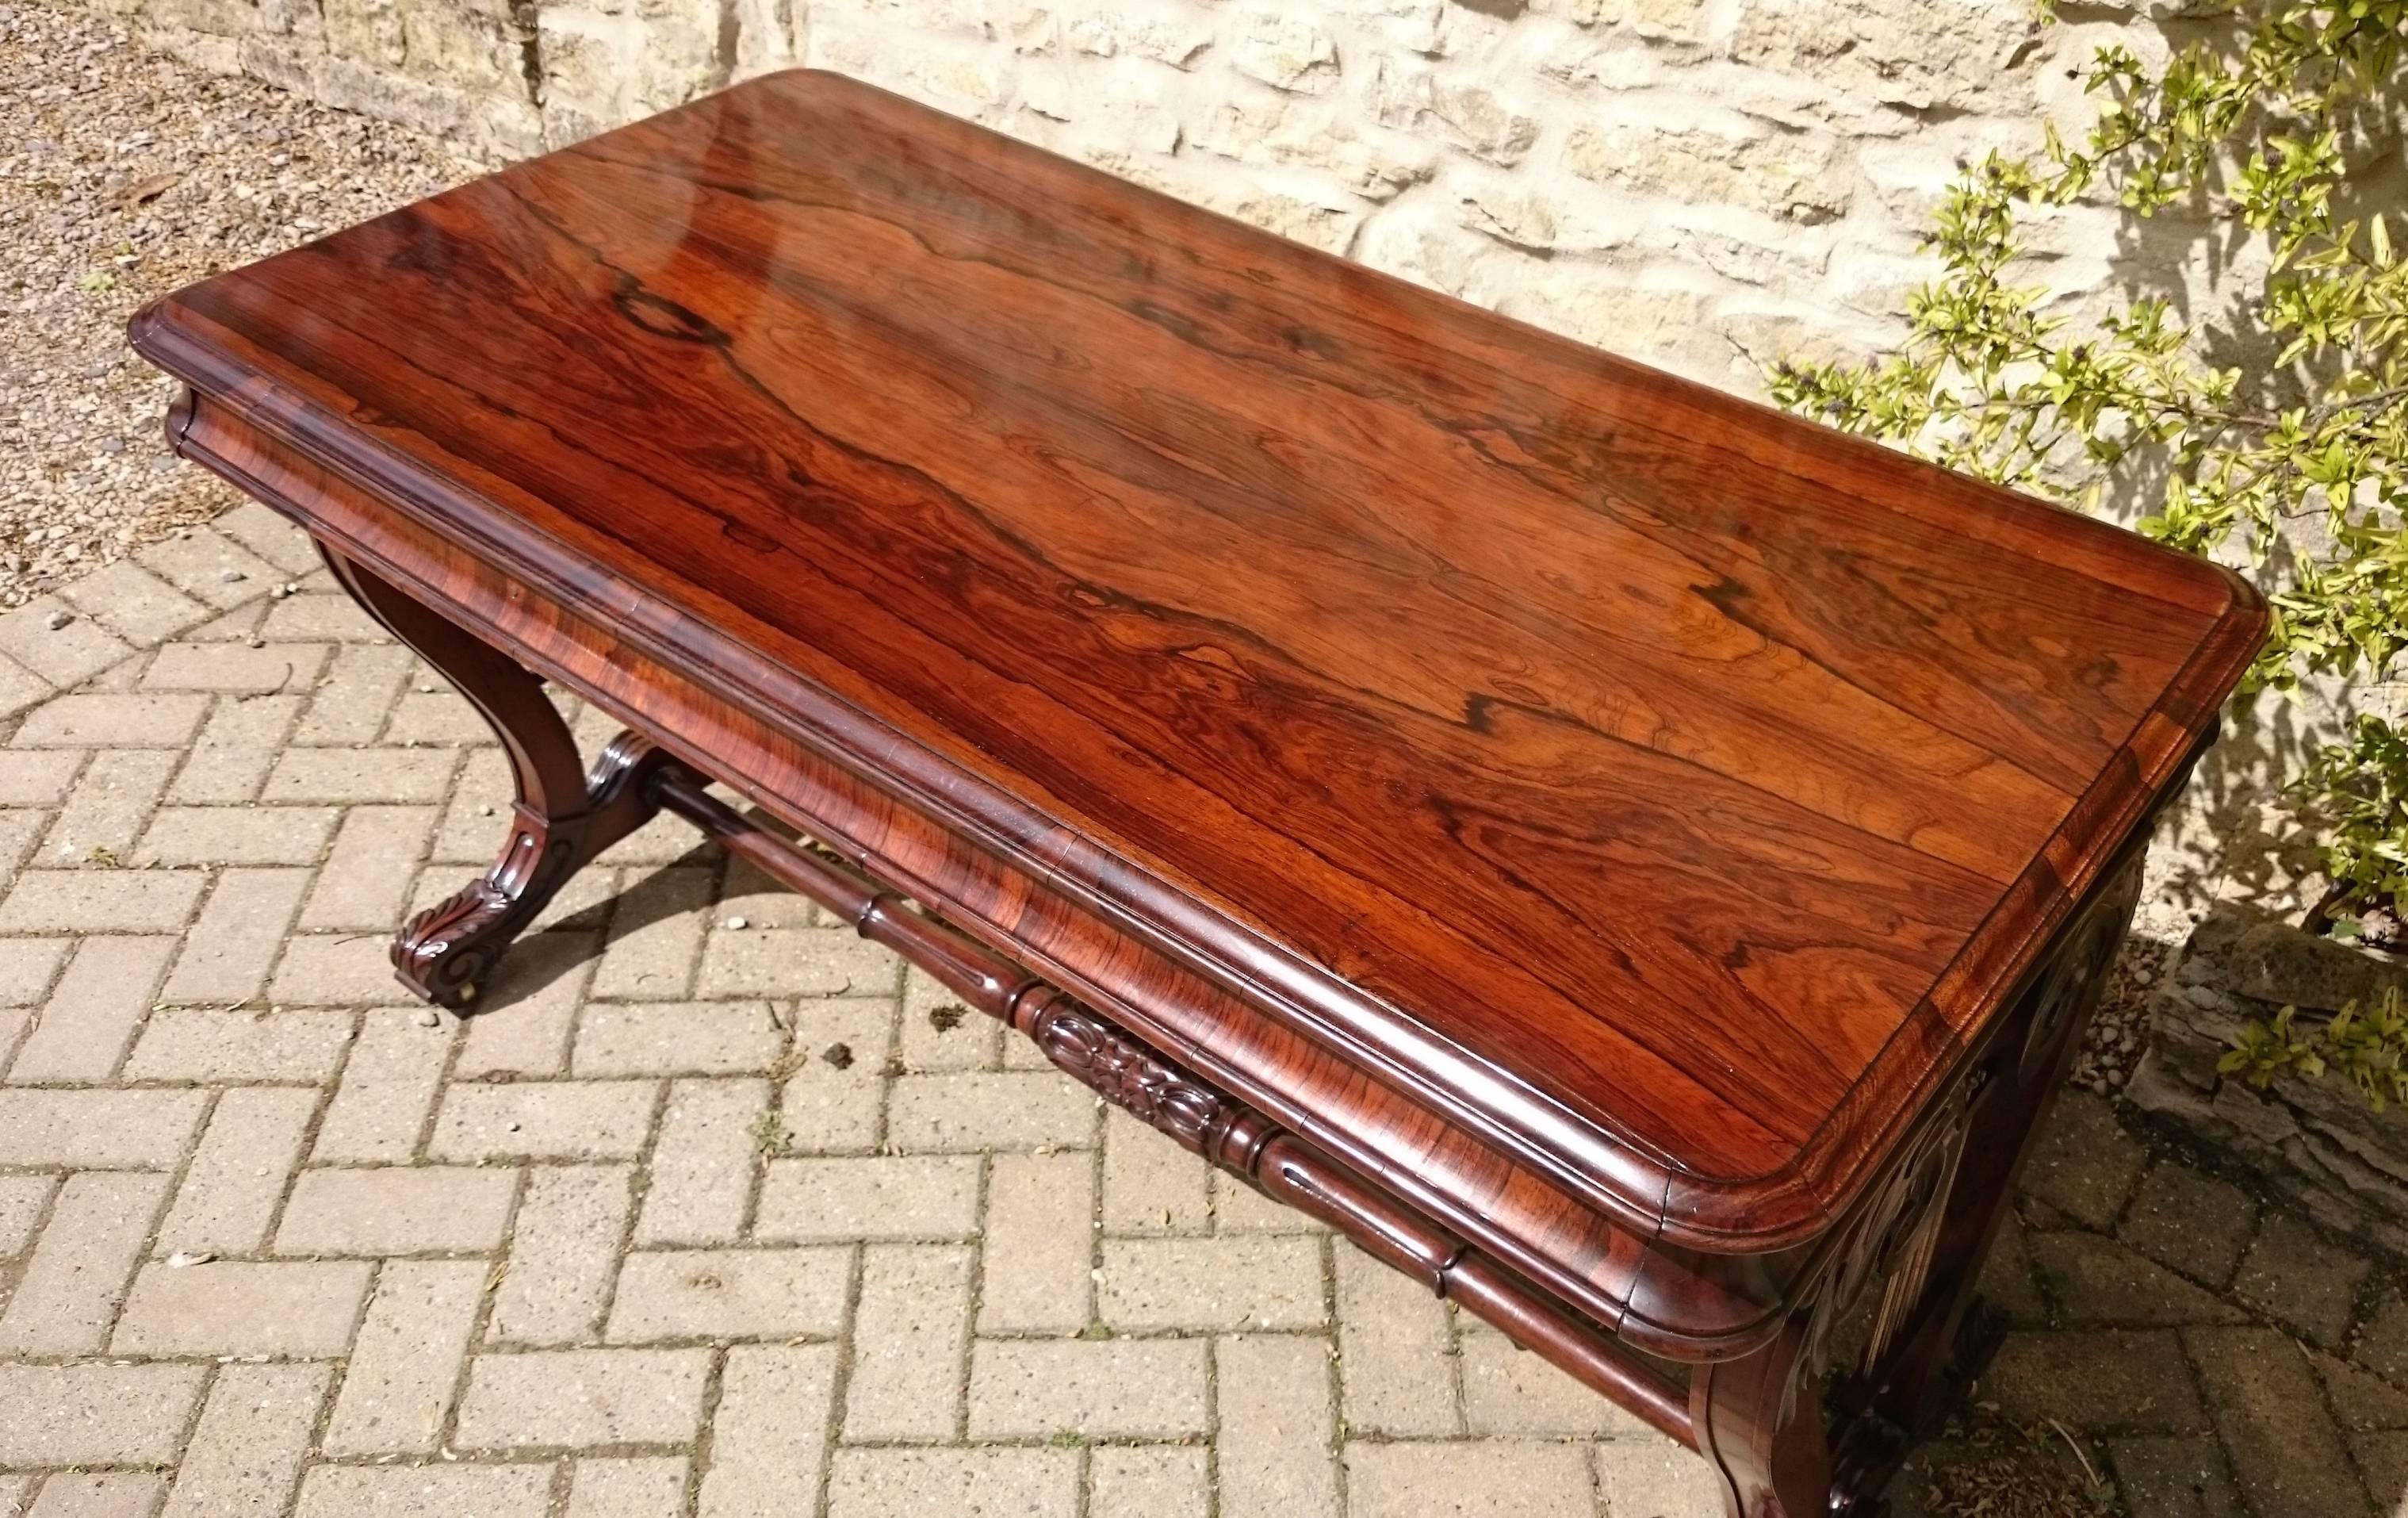 Very fine quality Regency rosewood antique writing table. This table has a thin frieze and lots of legroom for sitting if it is to be used as a desk. It is also useful as a side table or as a sofa table as it is the same height as a sofa table and